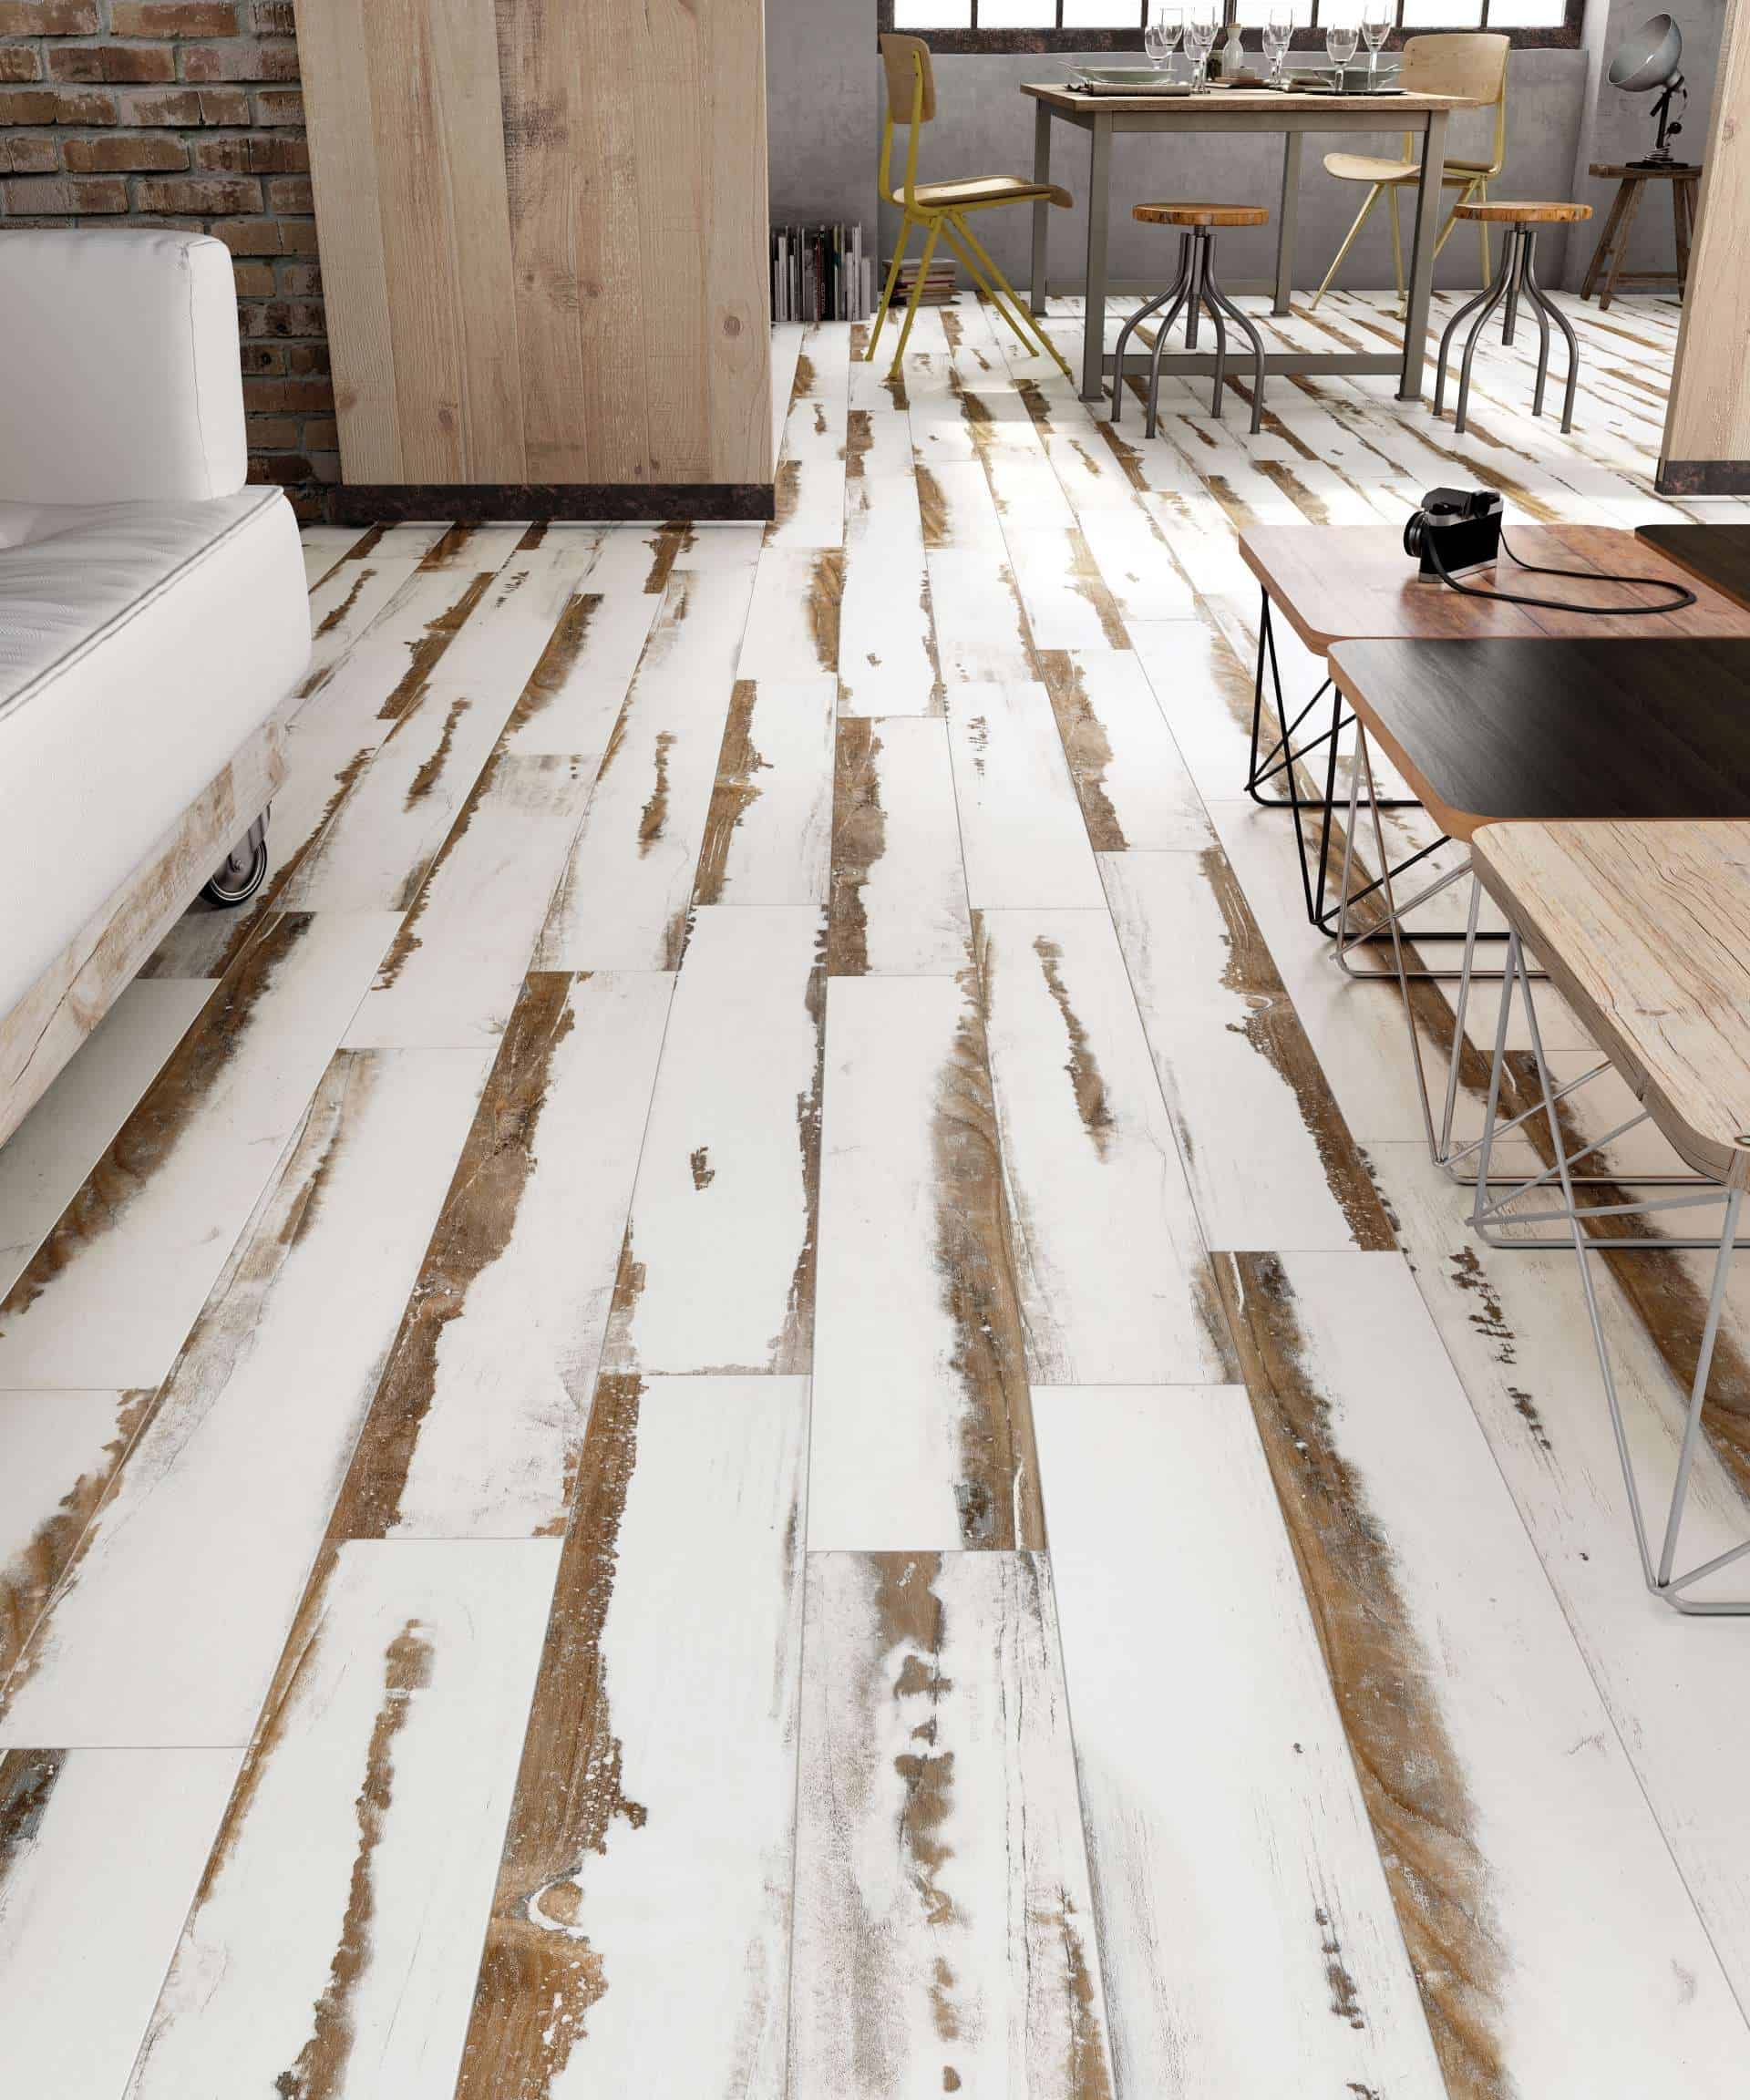 Wood Effect Tiles for Floors and Walls: 30 Nicest Porcelain and Ceramic